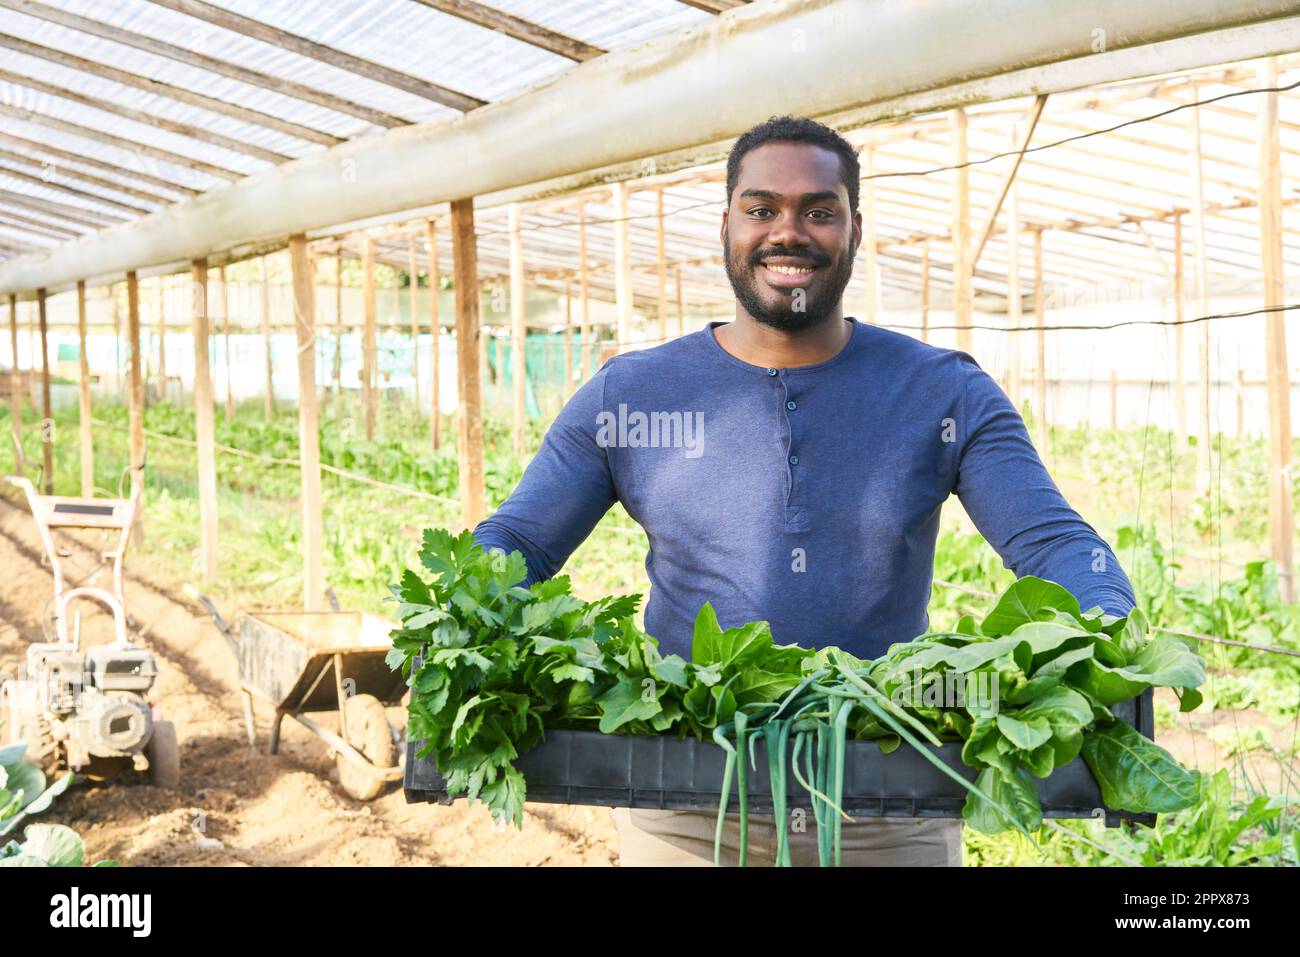 Portrait of smiling young male farmer holding crate of leafy vegetables in greenhouse Stock Photo